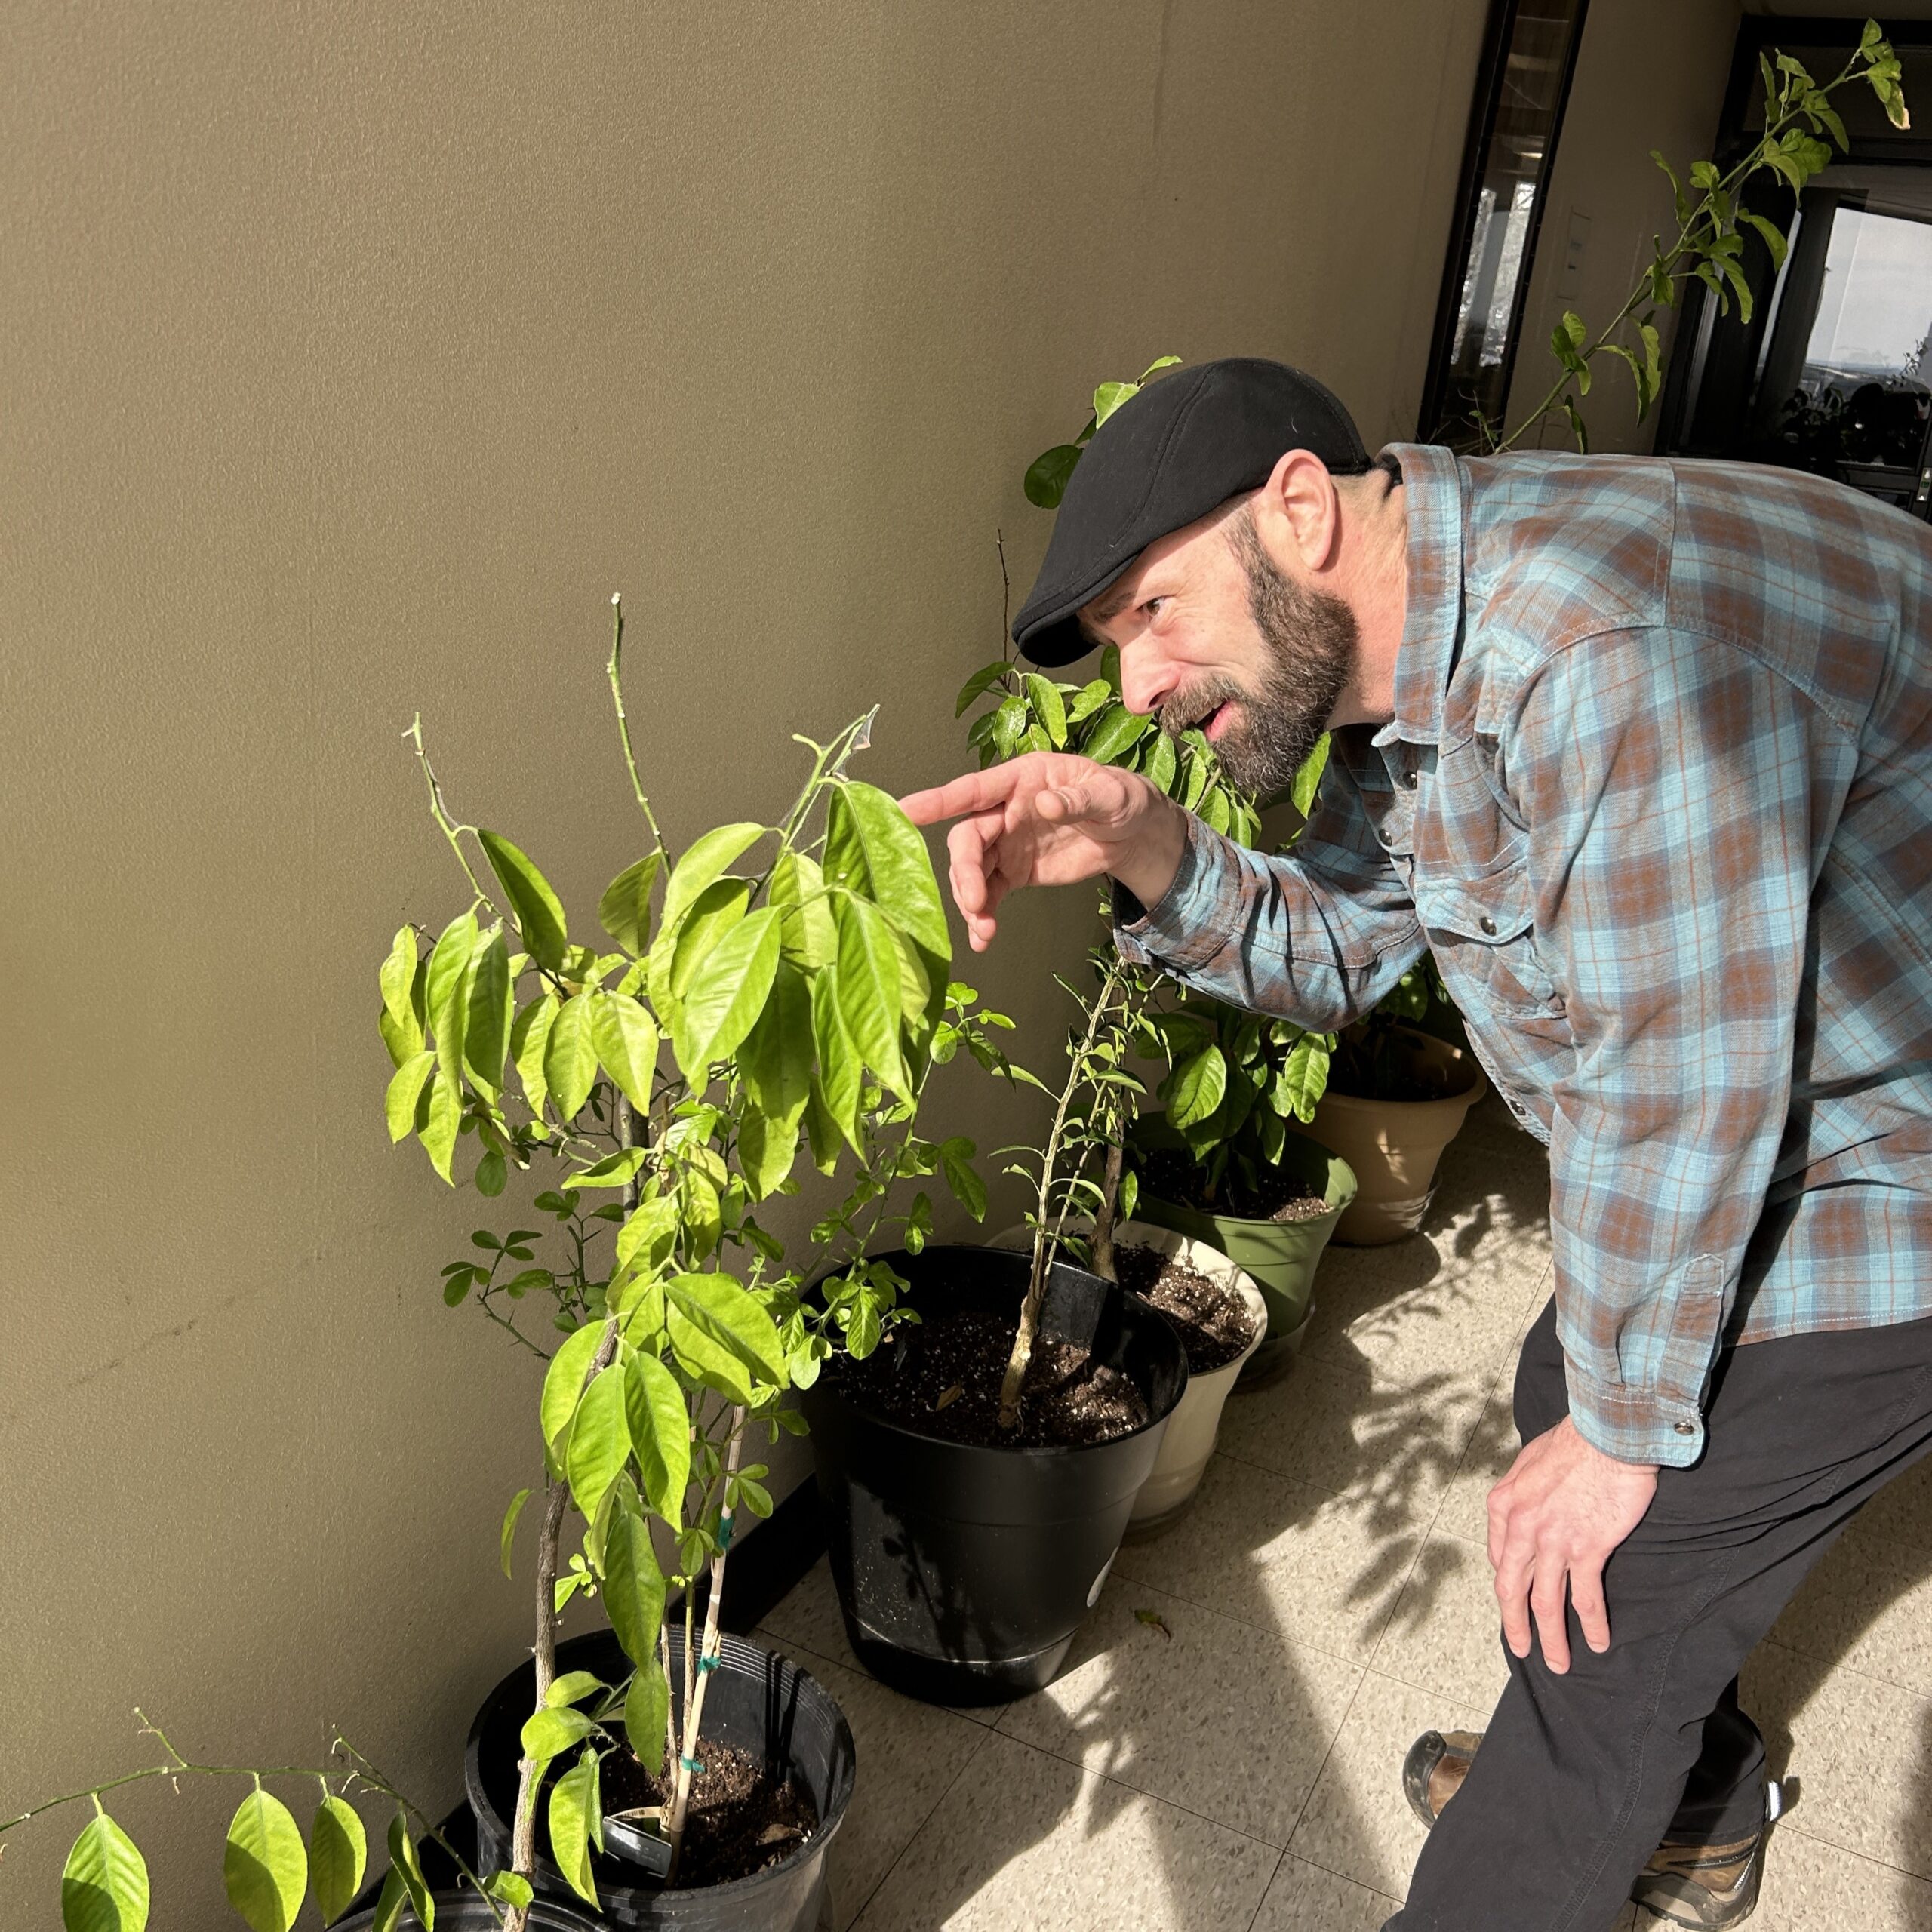 Person thoughtfully inspects a potted plant